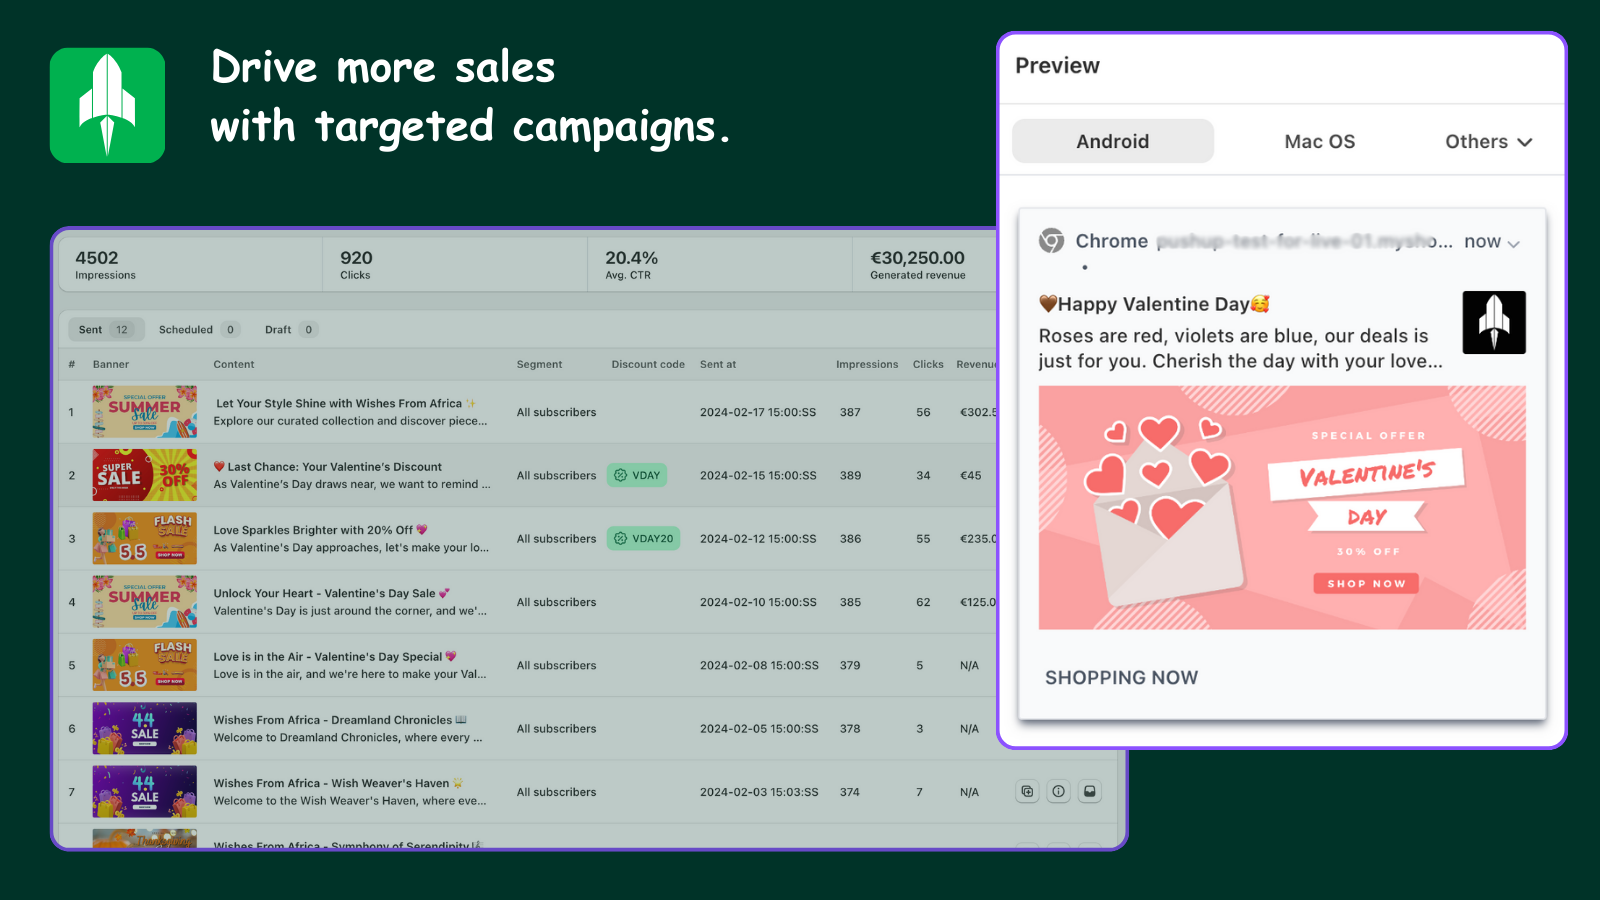 Drive more sales with targeted campaigns